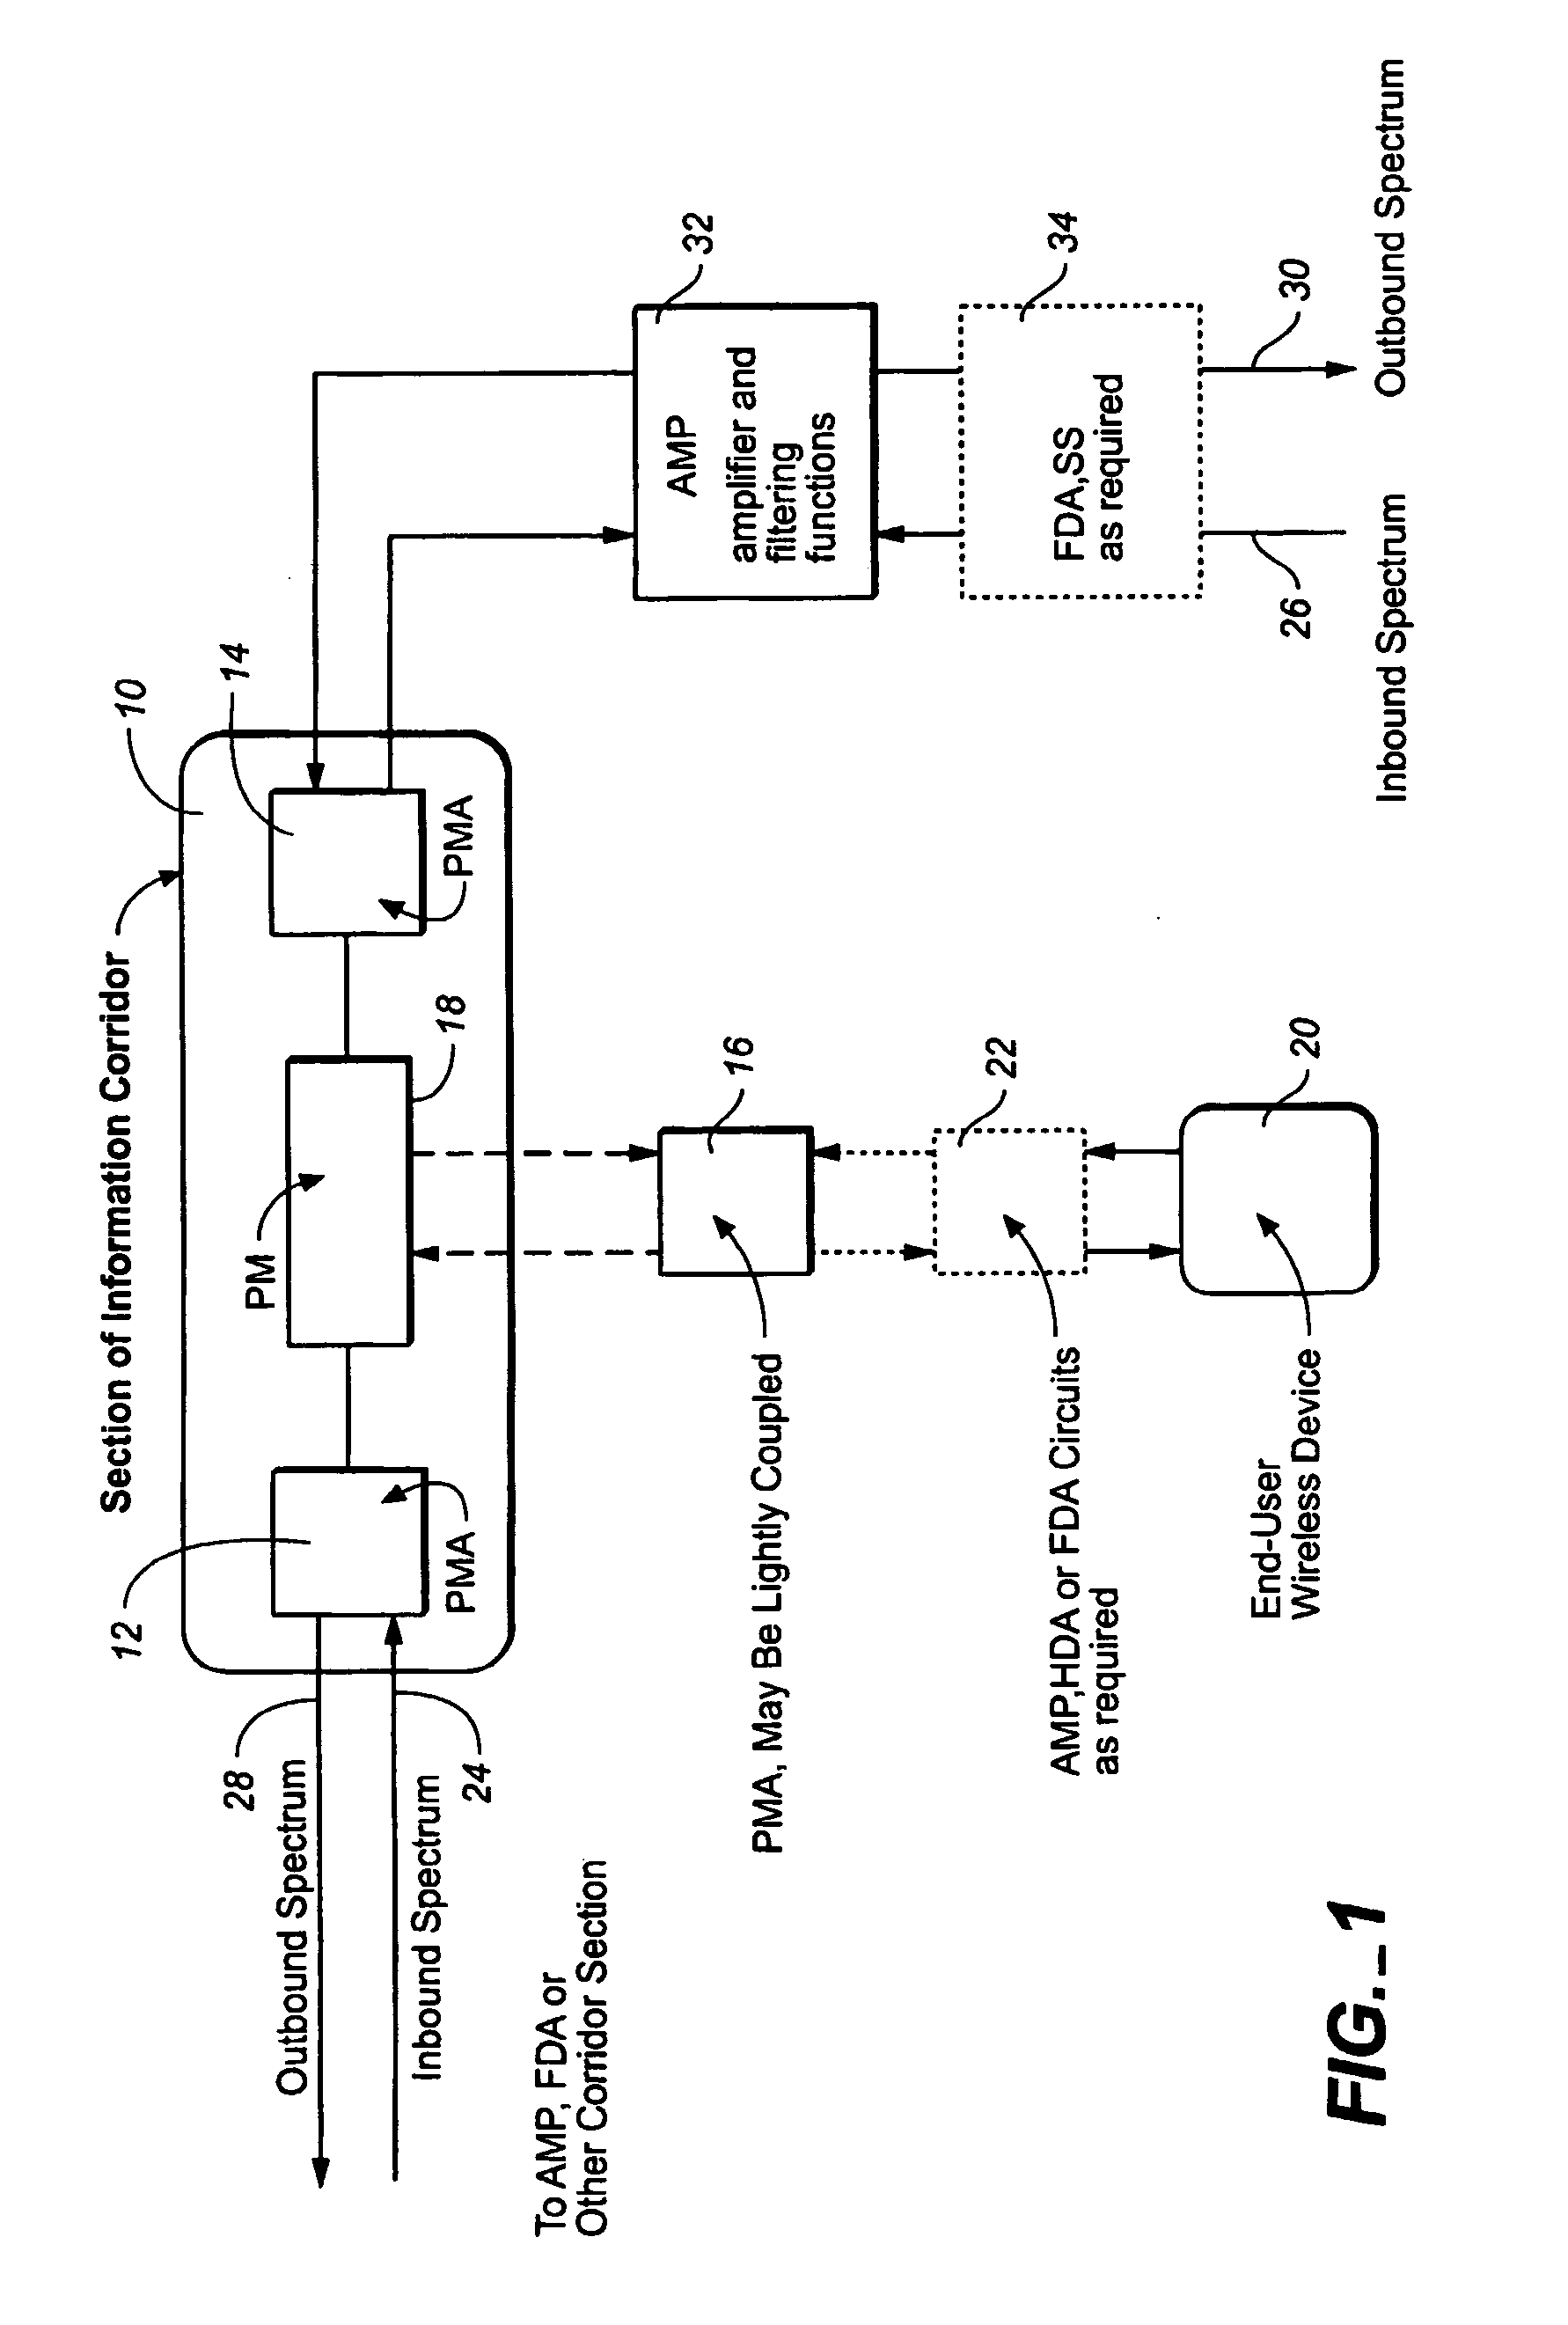 Method and apparatus for information conveyance and distribution